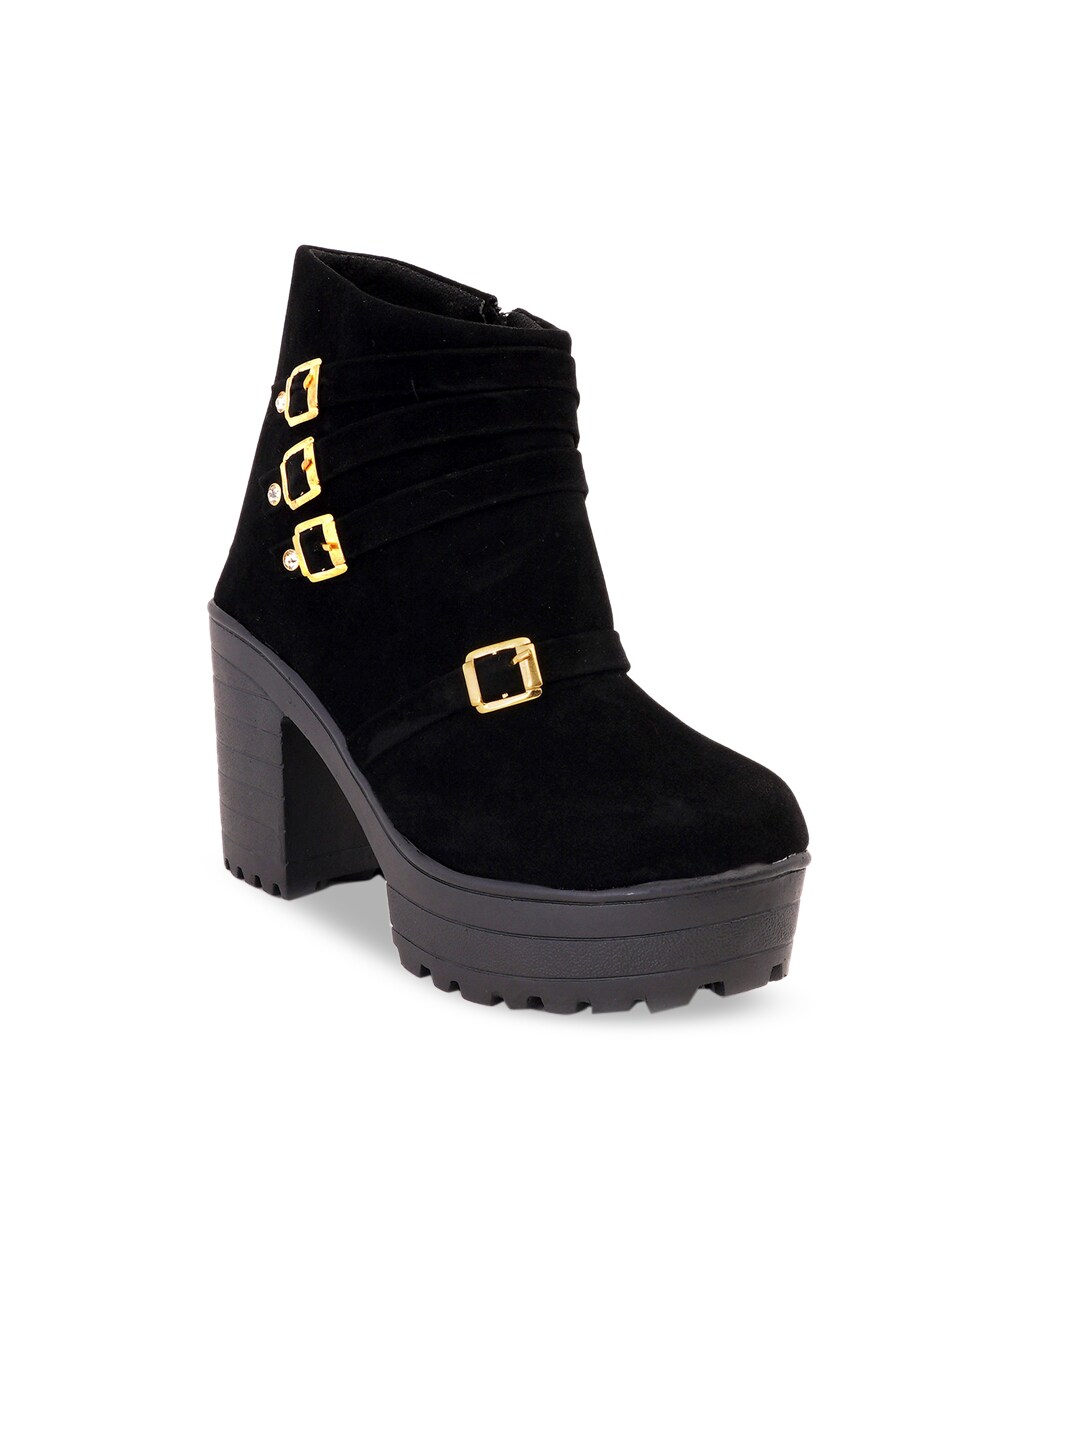 VAYONAA Black Suede High-Top Platform Heeled Boots with Buckles Price in India